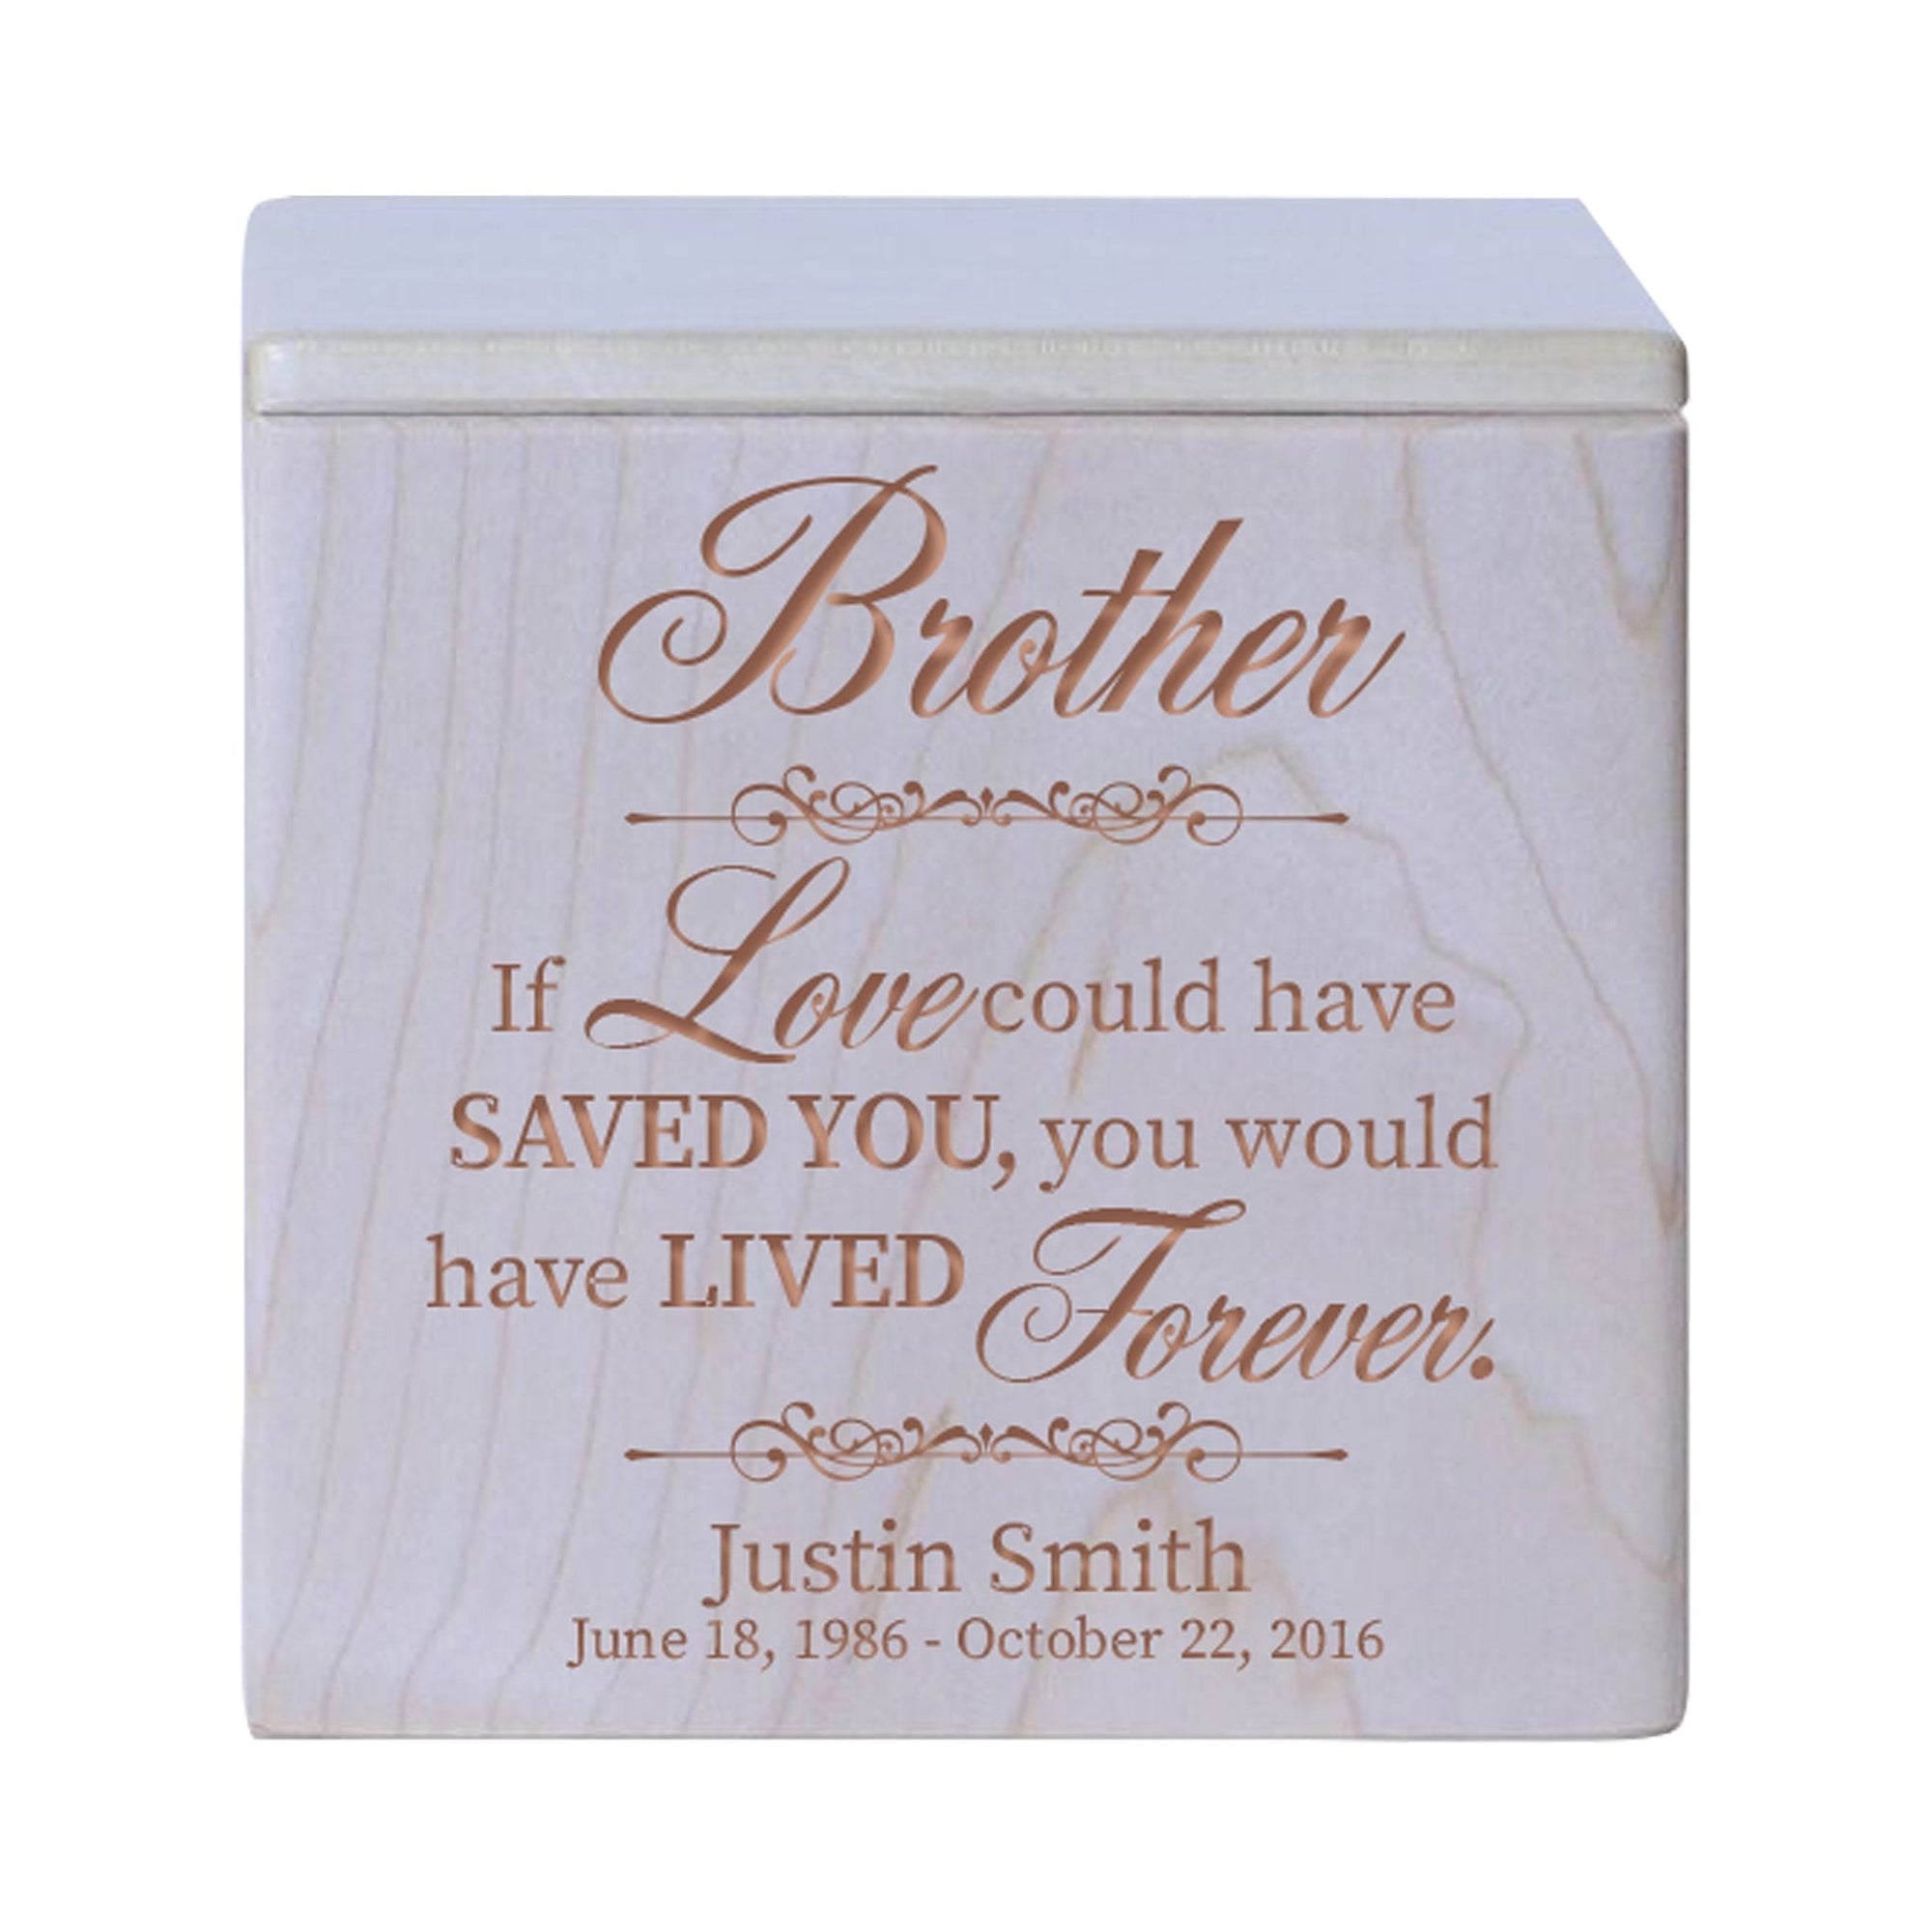 Custom Wooden Cremation Urn Keepsake For Human Ashes holds 49 cu in Brother, If Love Could Have - LifeSong Milestones